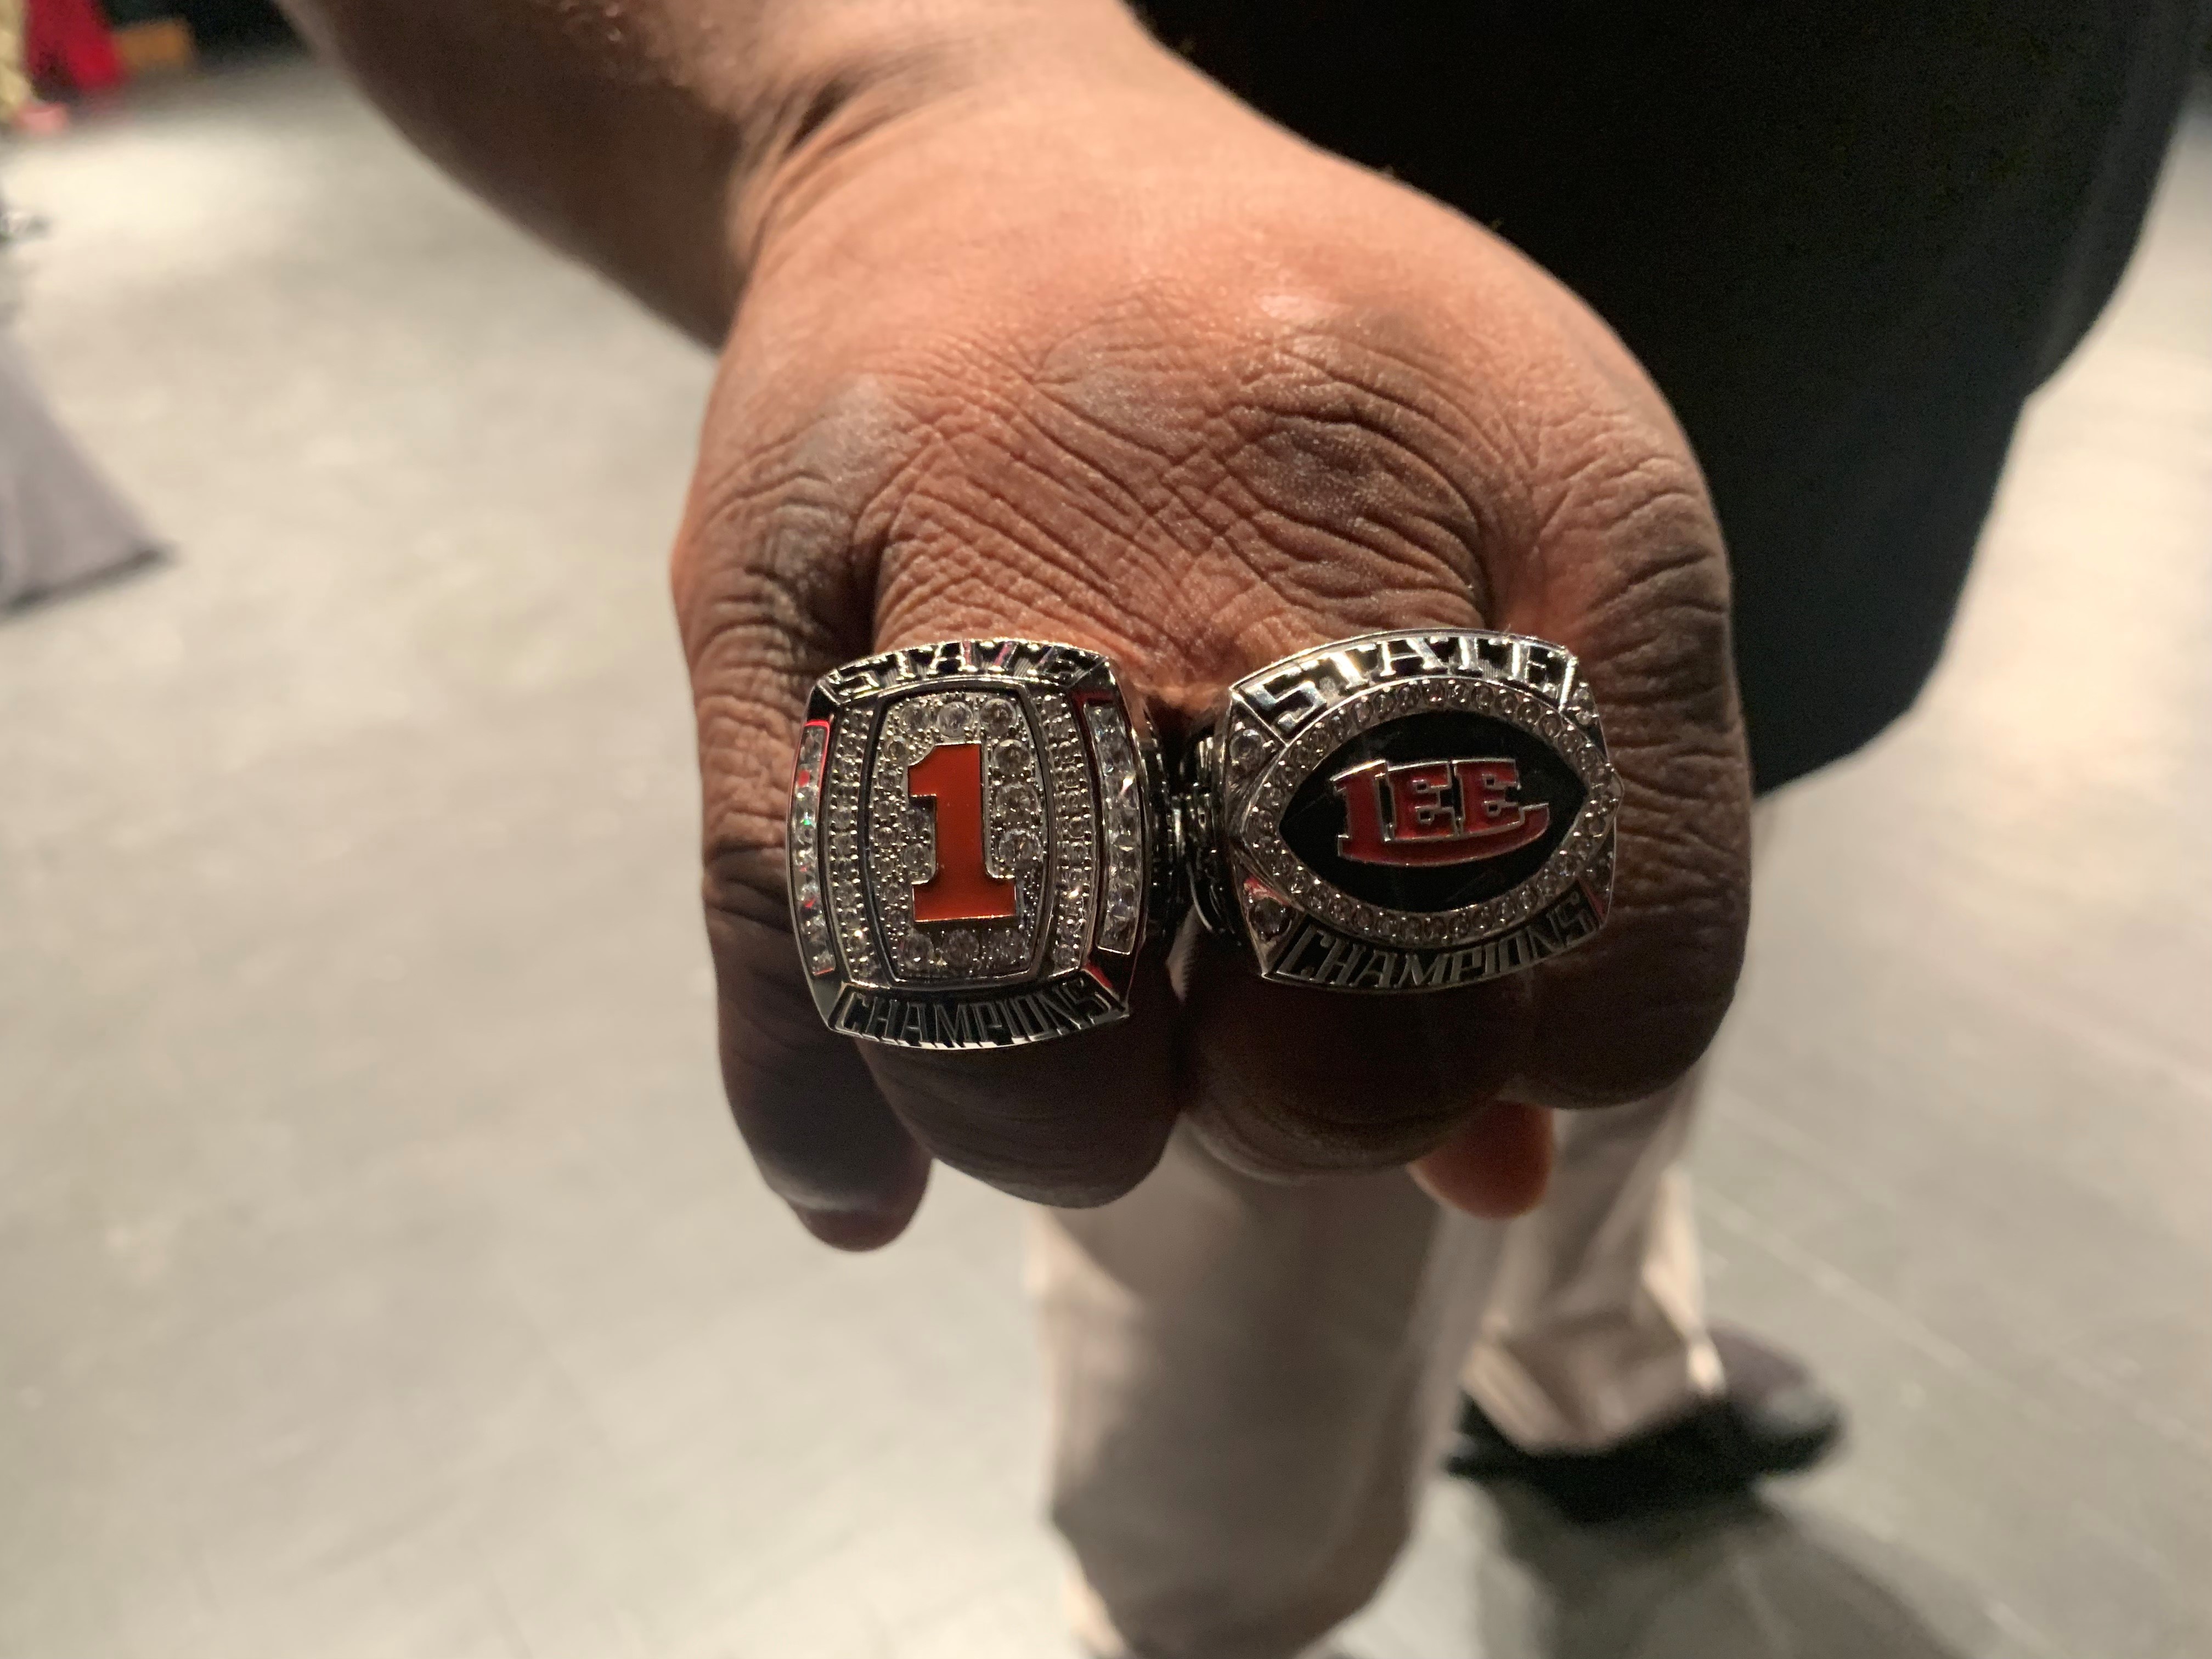 Championship Rings for High School, College and Professional Teams